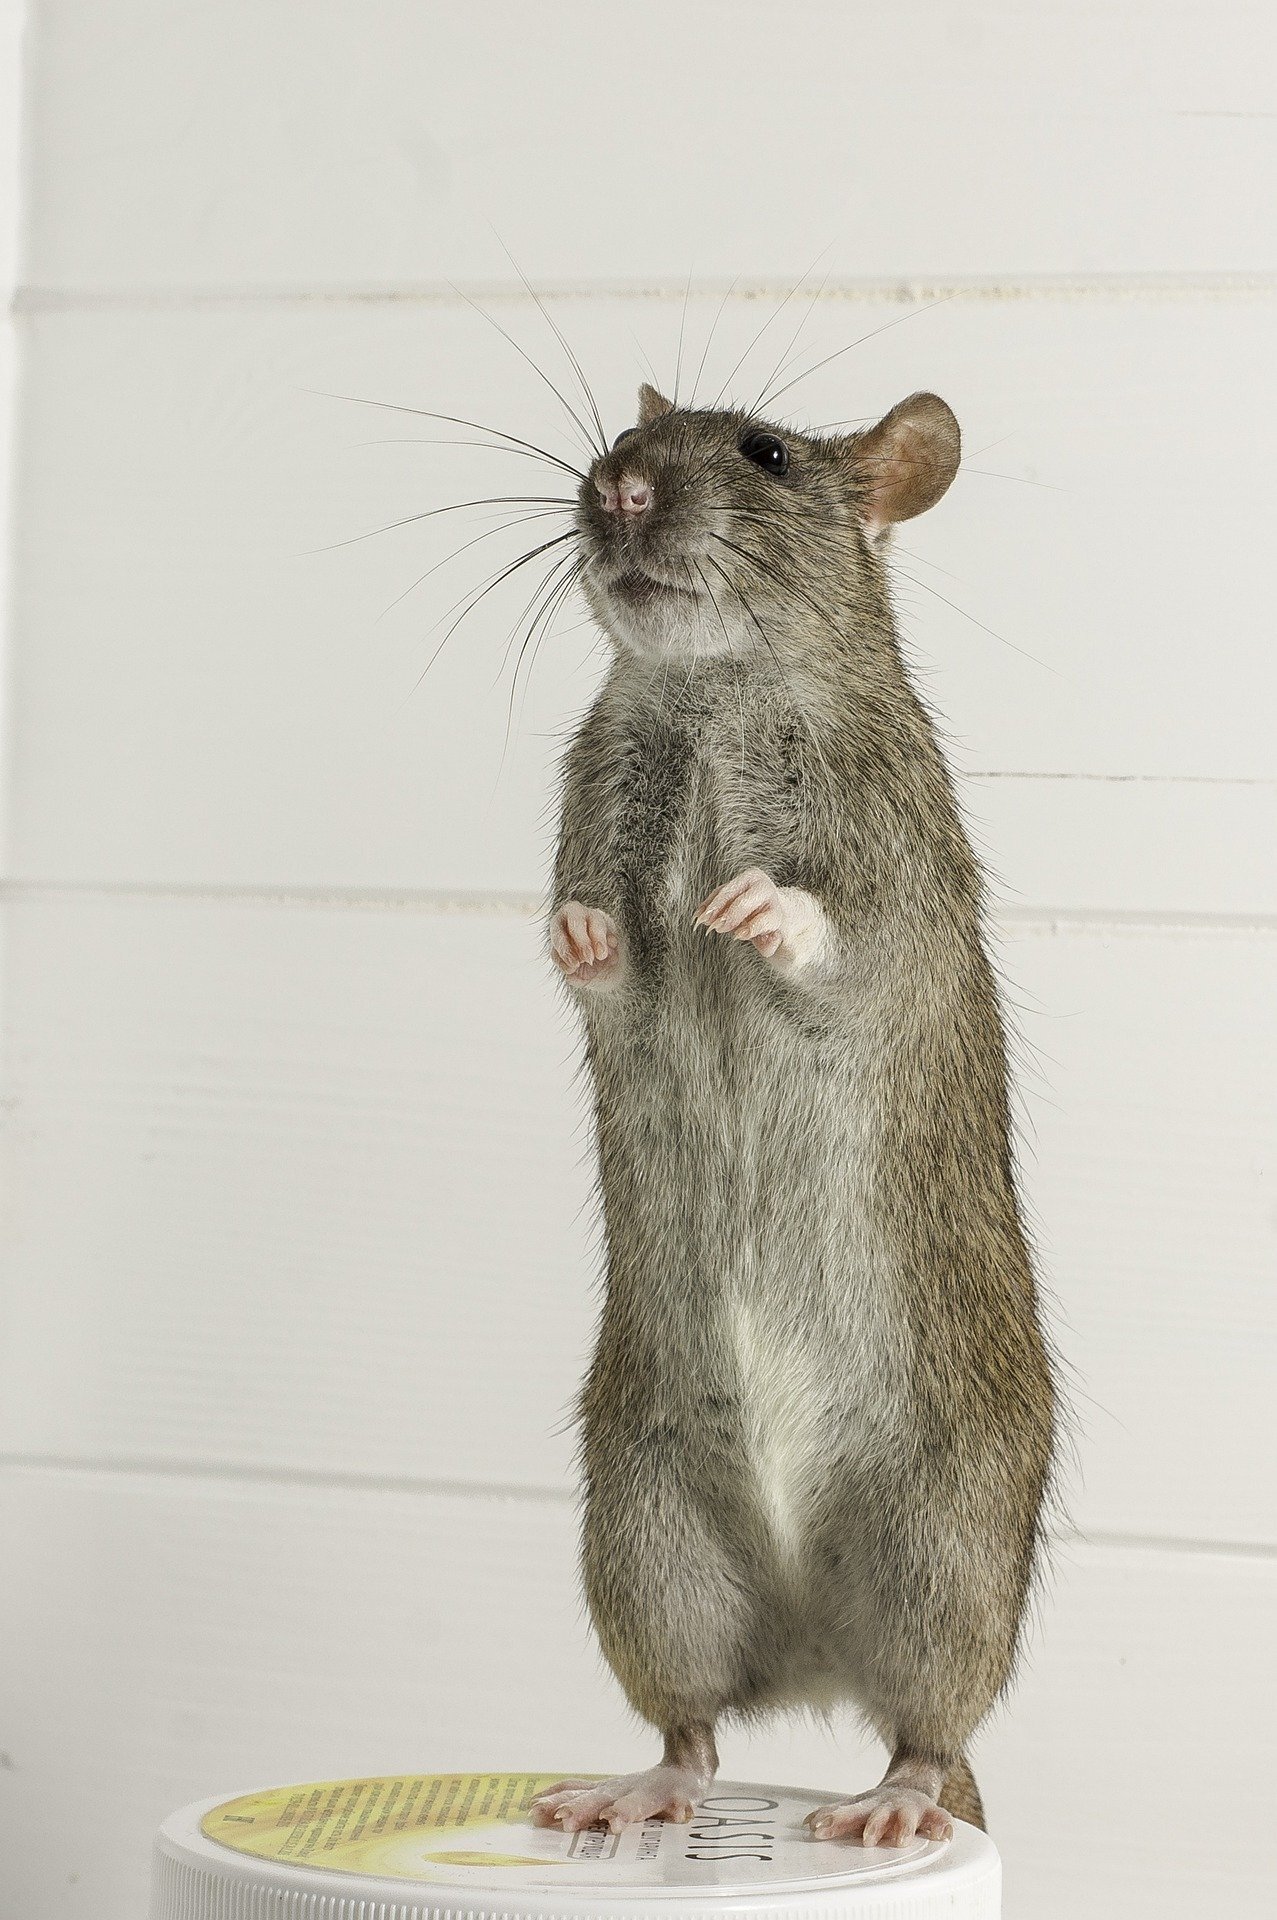 photo of I'll scratch yours if you scratch mine: How rats help each other out image